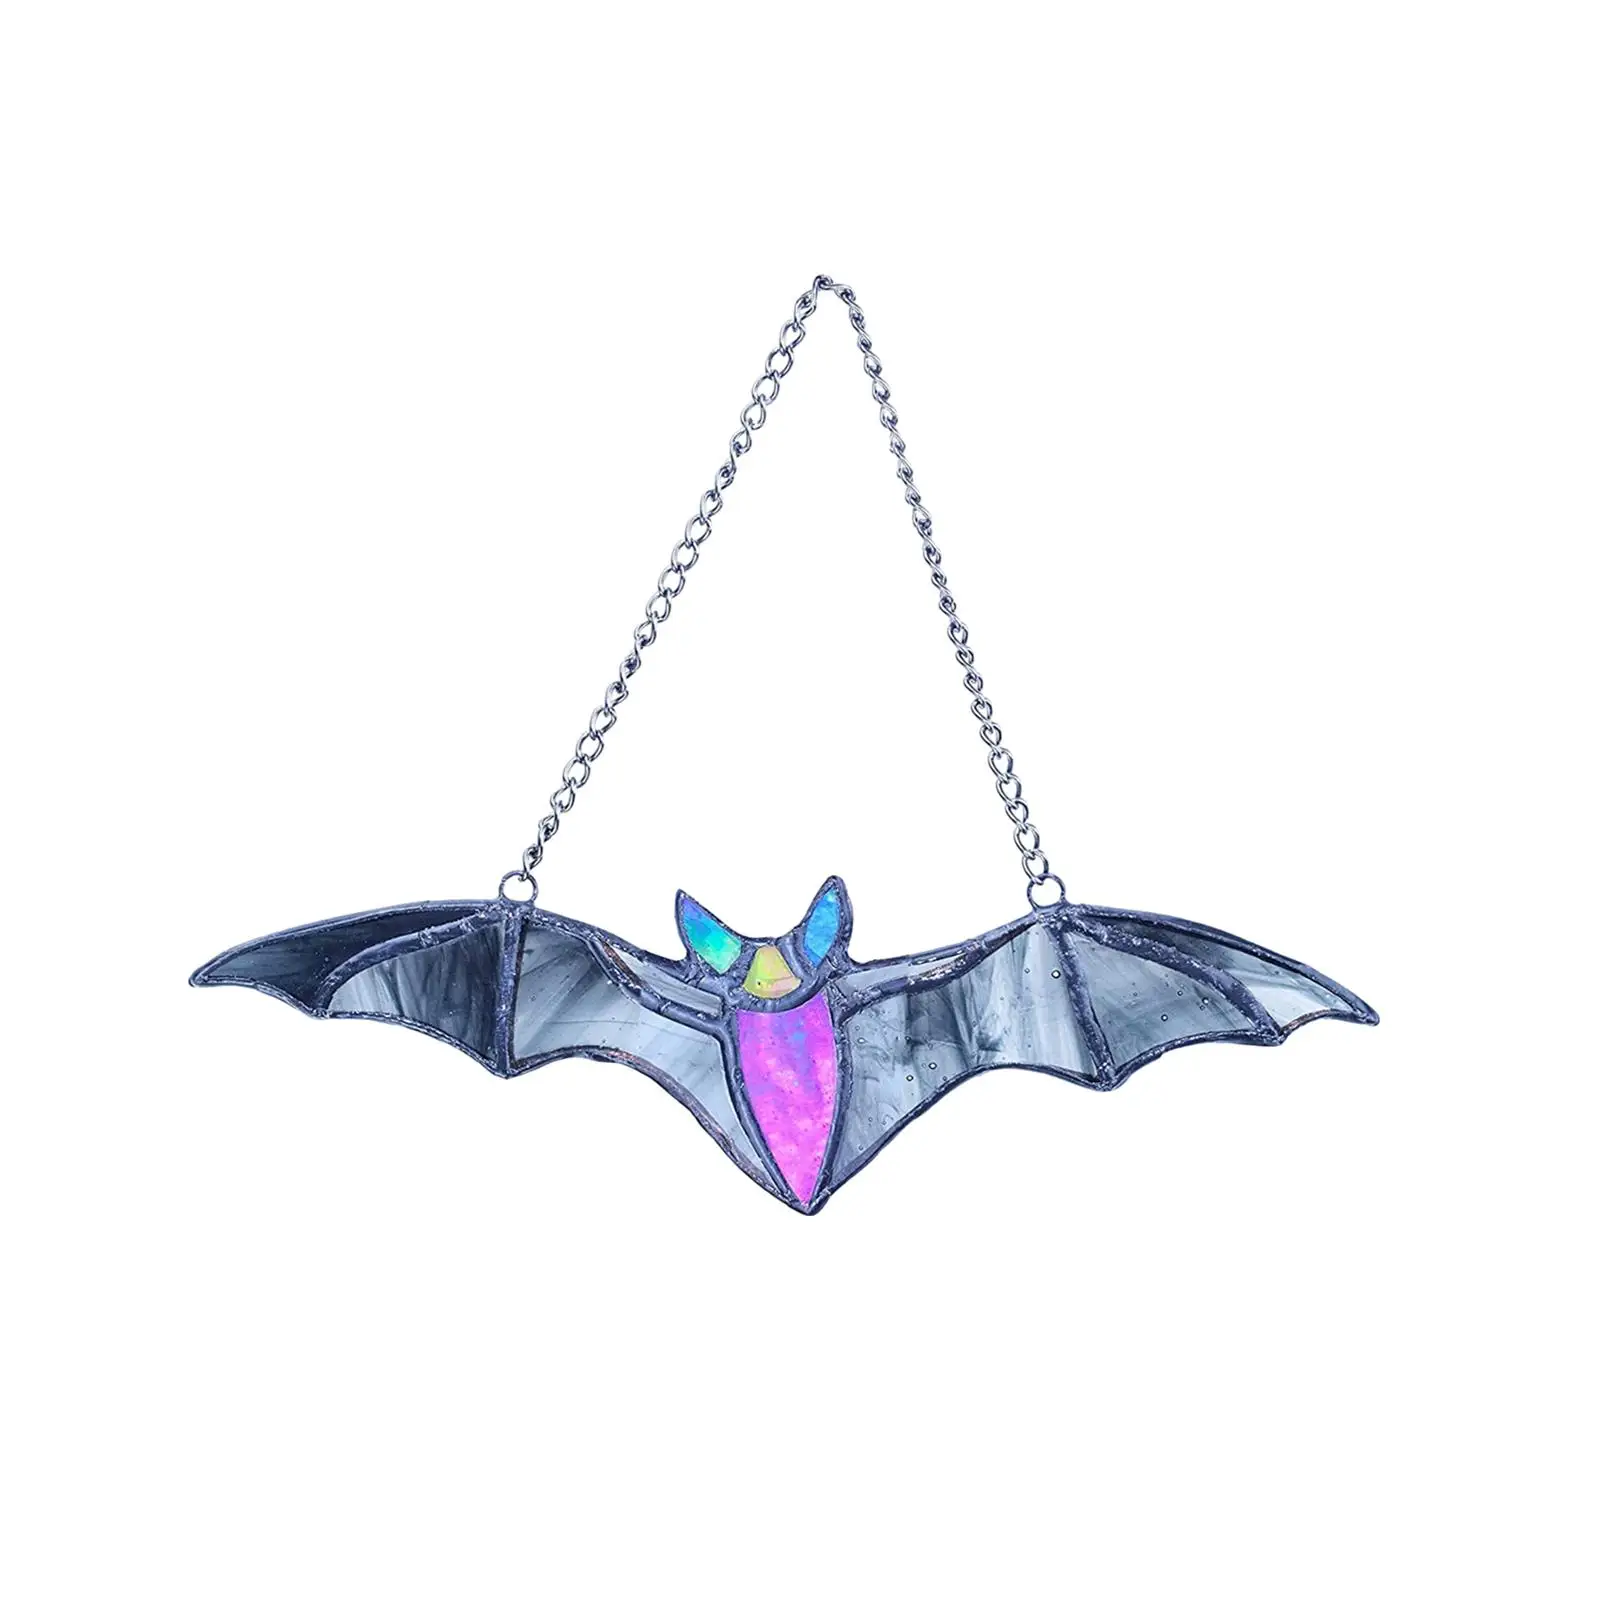 Halloween Bat Acrylic Hanging Pendant Decoration Colorful Sturdy Versatile with Metal Chains for Kids, Friends, Relatives Gifts